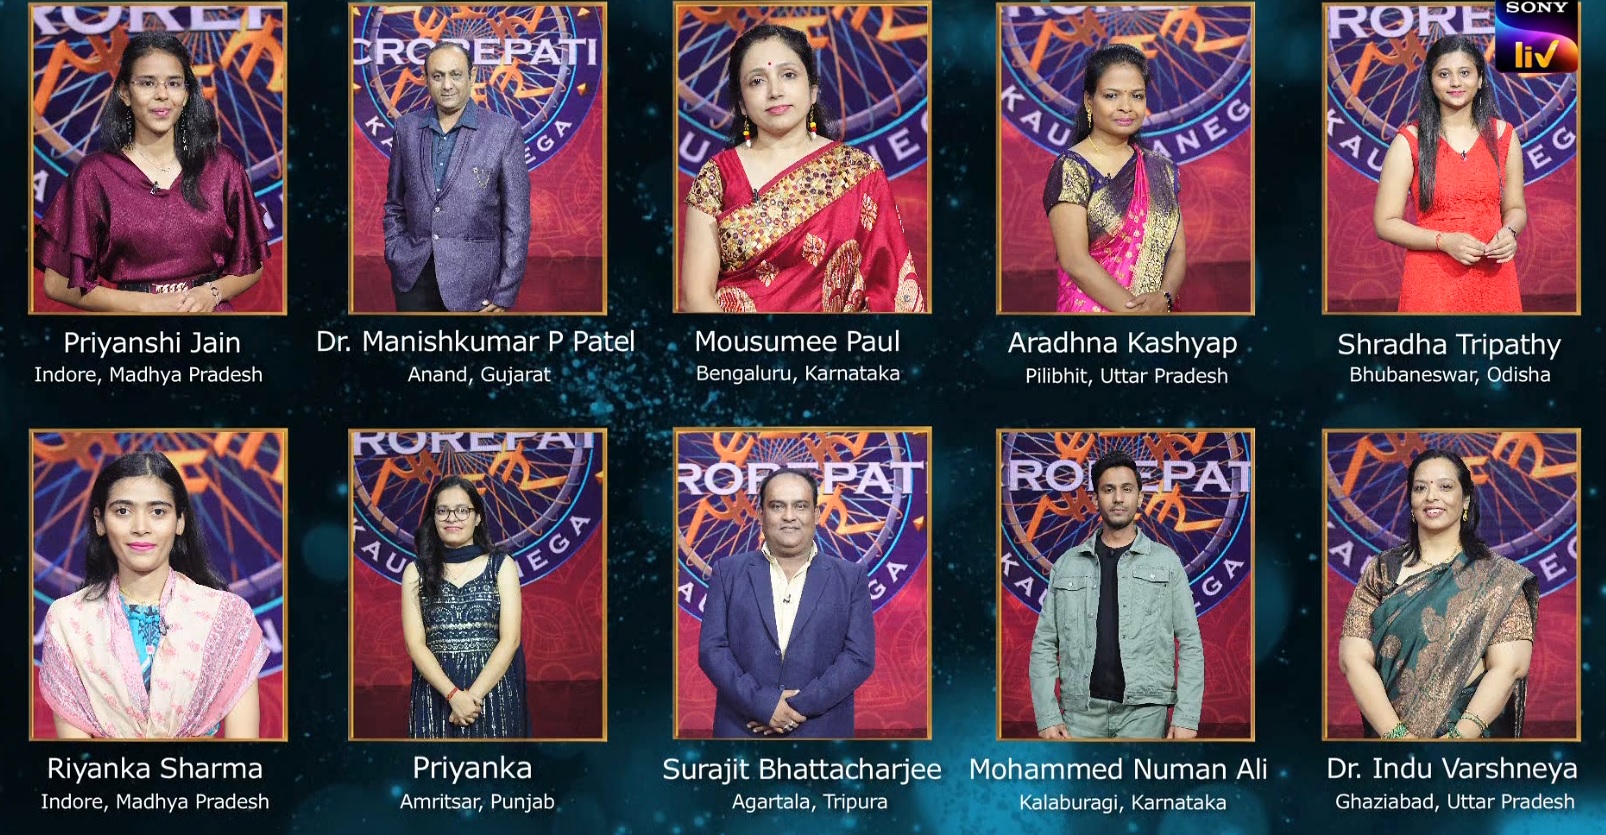 21st Friday – KBC Play Along Contestant 2022 – Top 10 Play along Contestants of the week